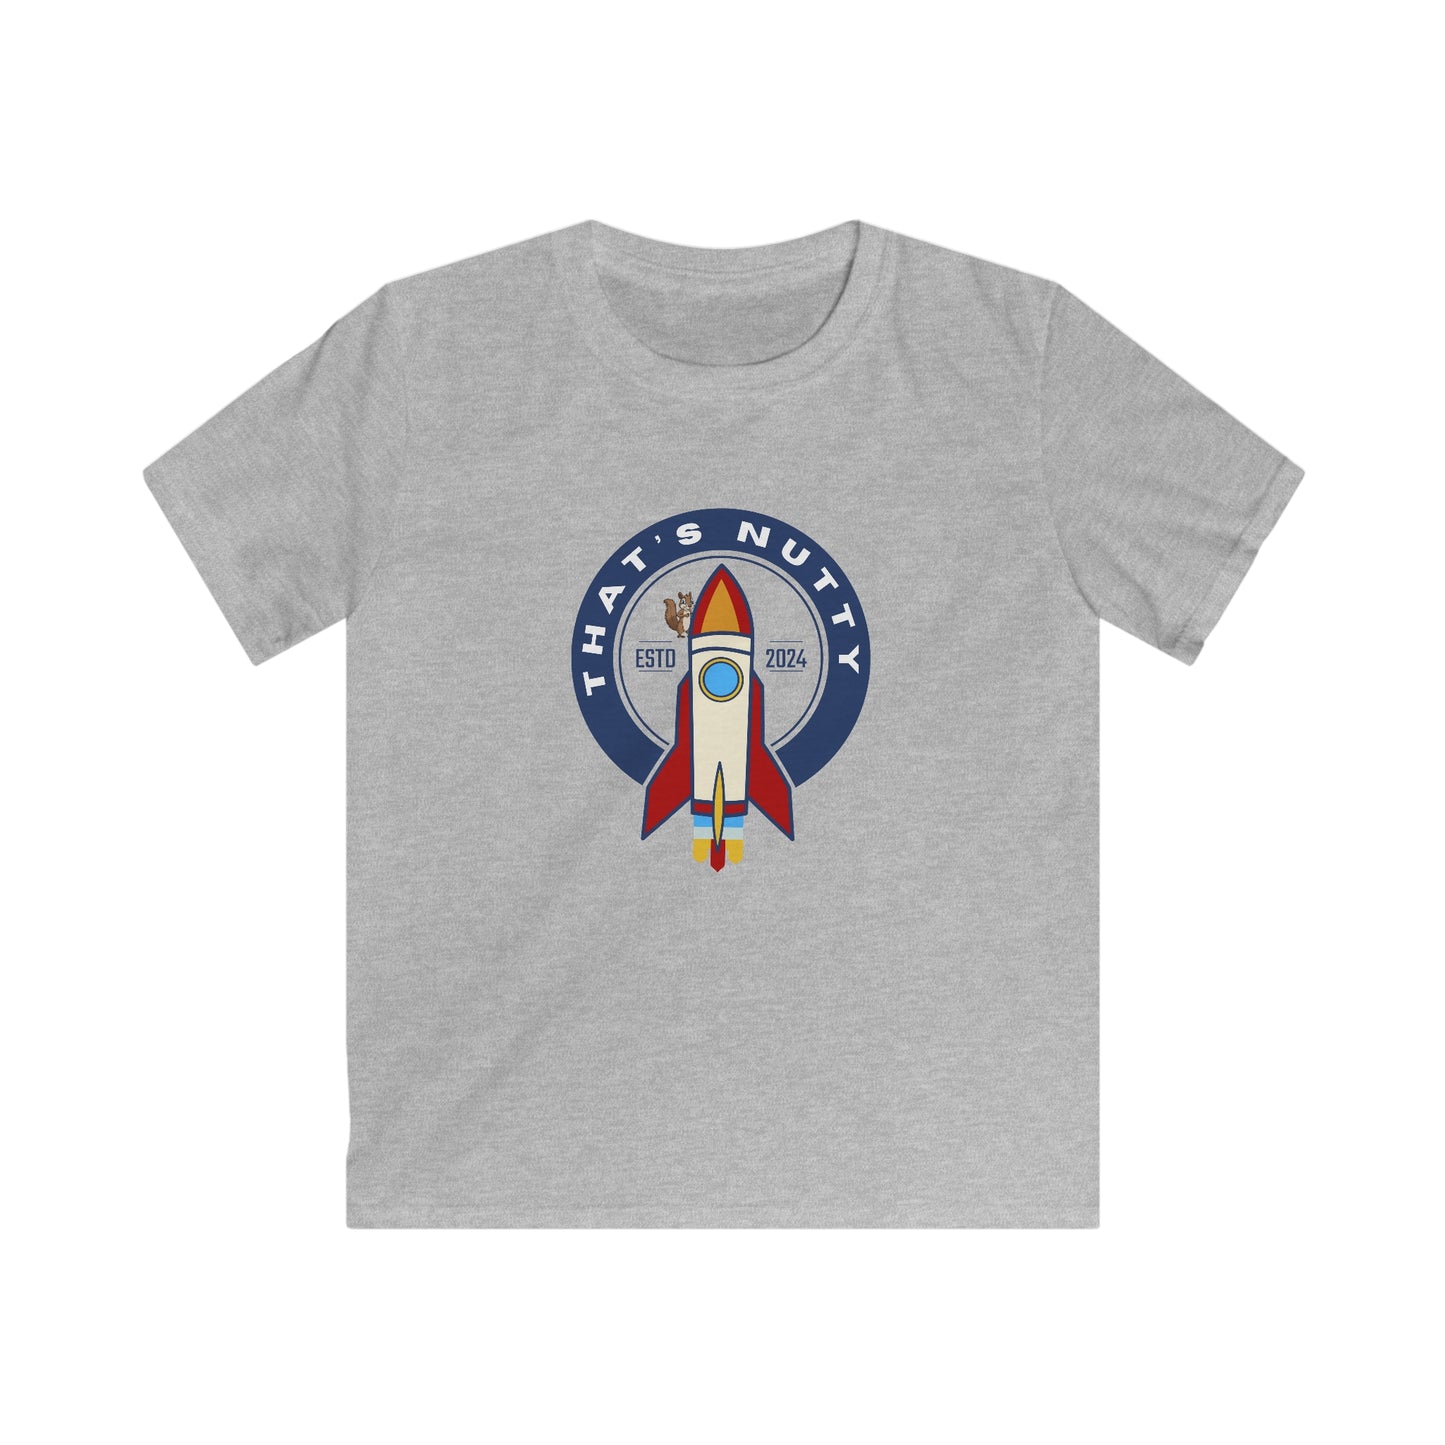 That's Nutty On A Rocket Ship. Kids Softstyle Tee